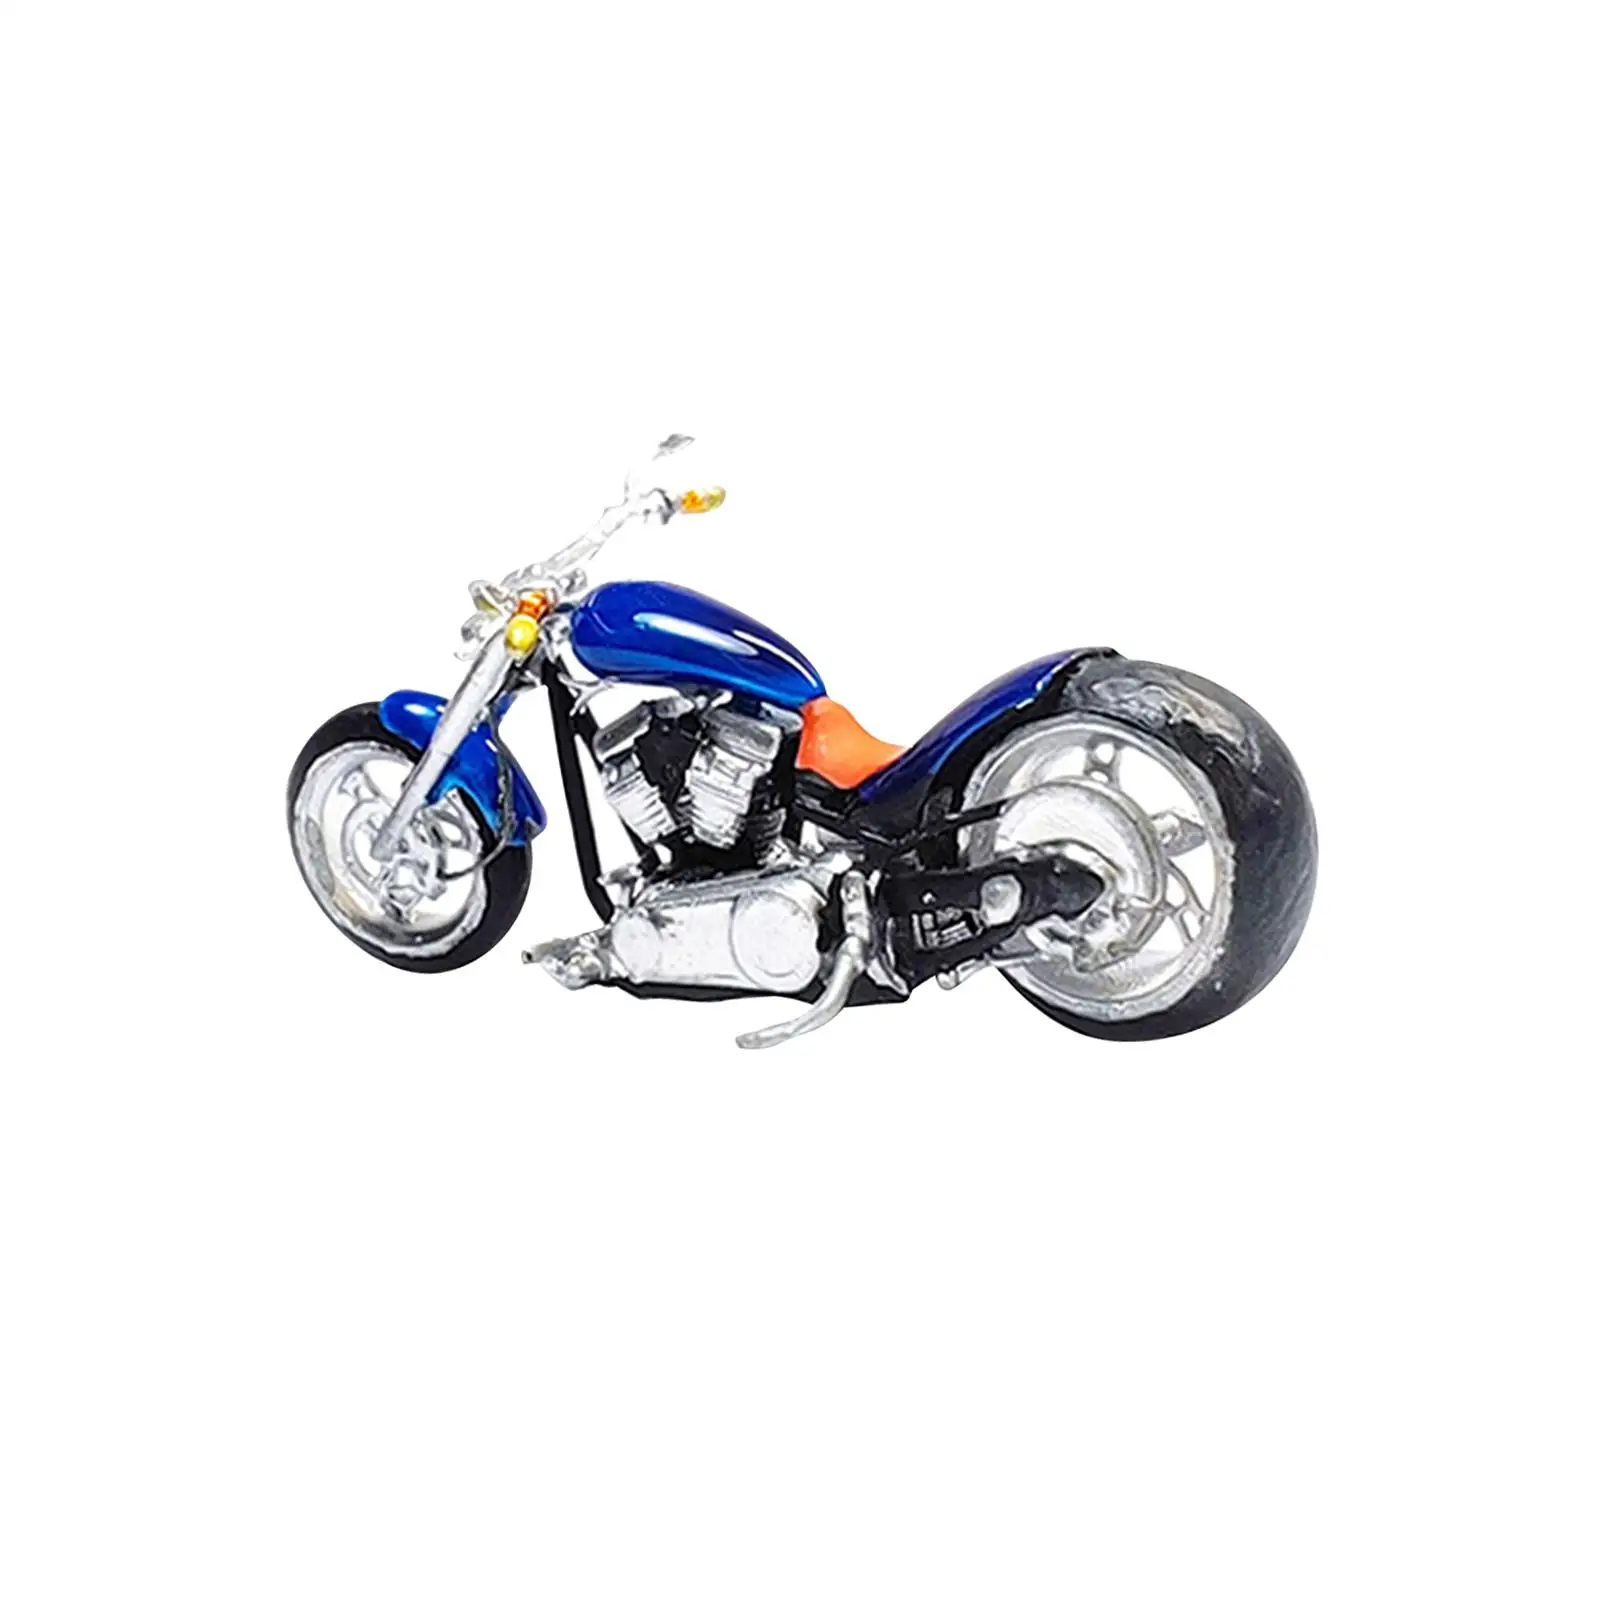 1/64 Painted Motocycle Model Vehicle Model Figurines for Layout Street Scene